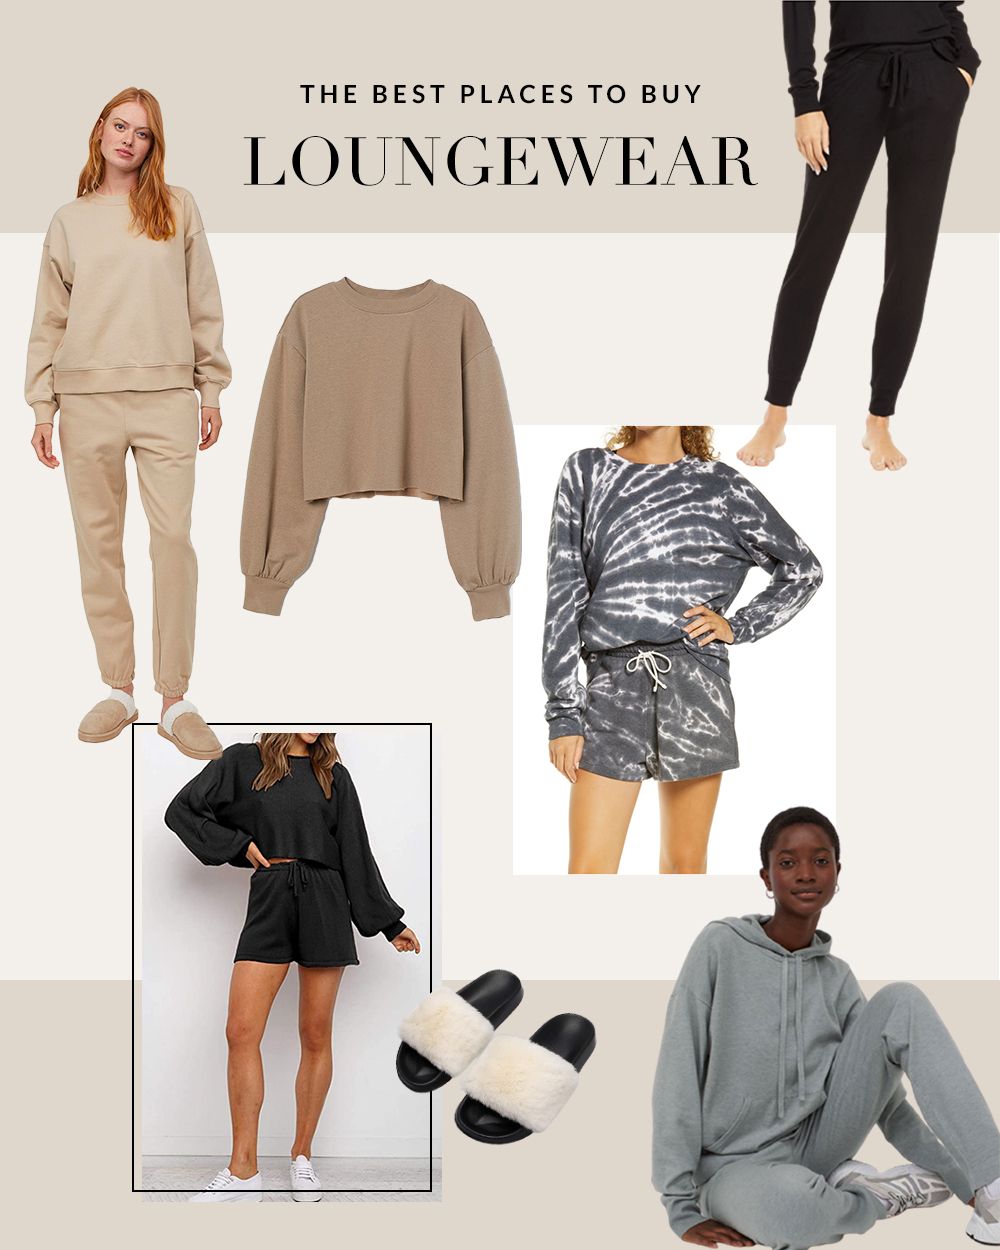 The Best Places To Buy Loungewear